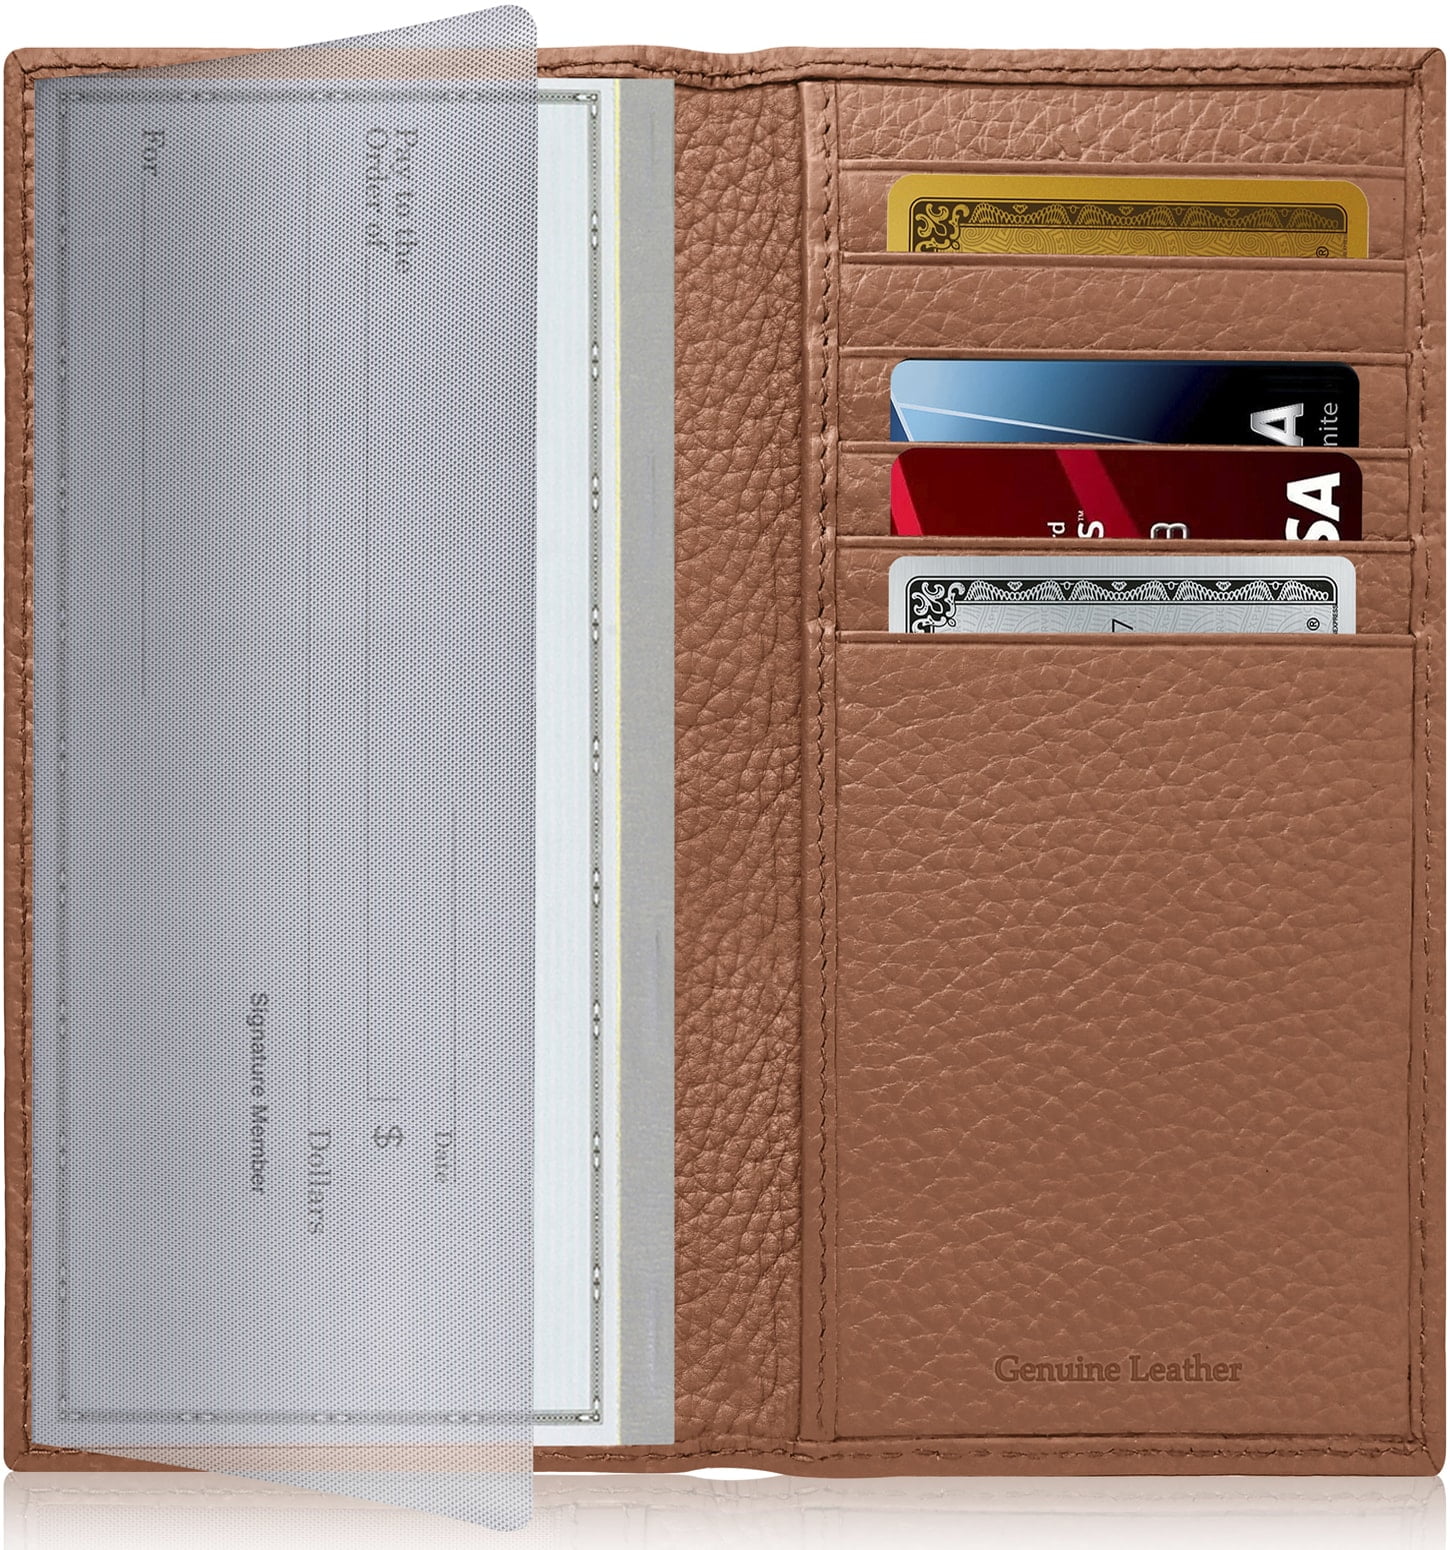 CHECKBOOK CREDIT CARD HOLDER ZIPPER BROWN NEW GENUINE LEATHER GREAT GIFT IDEA 